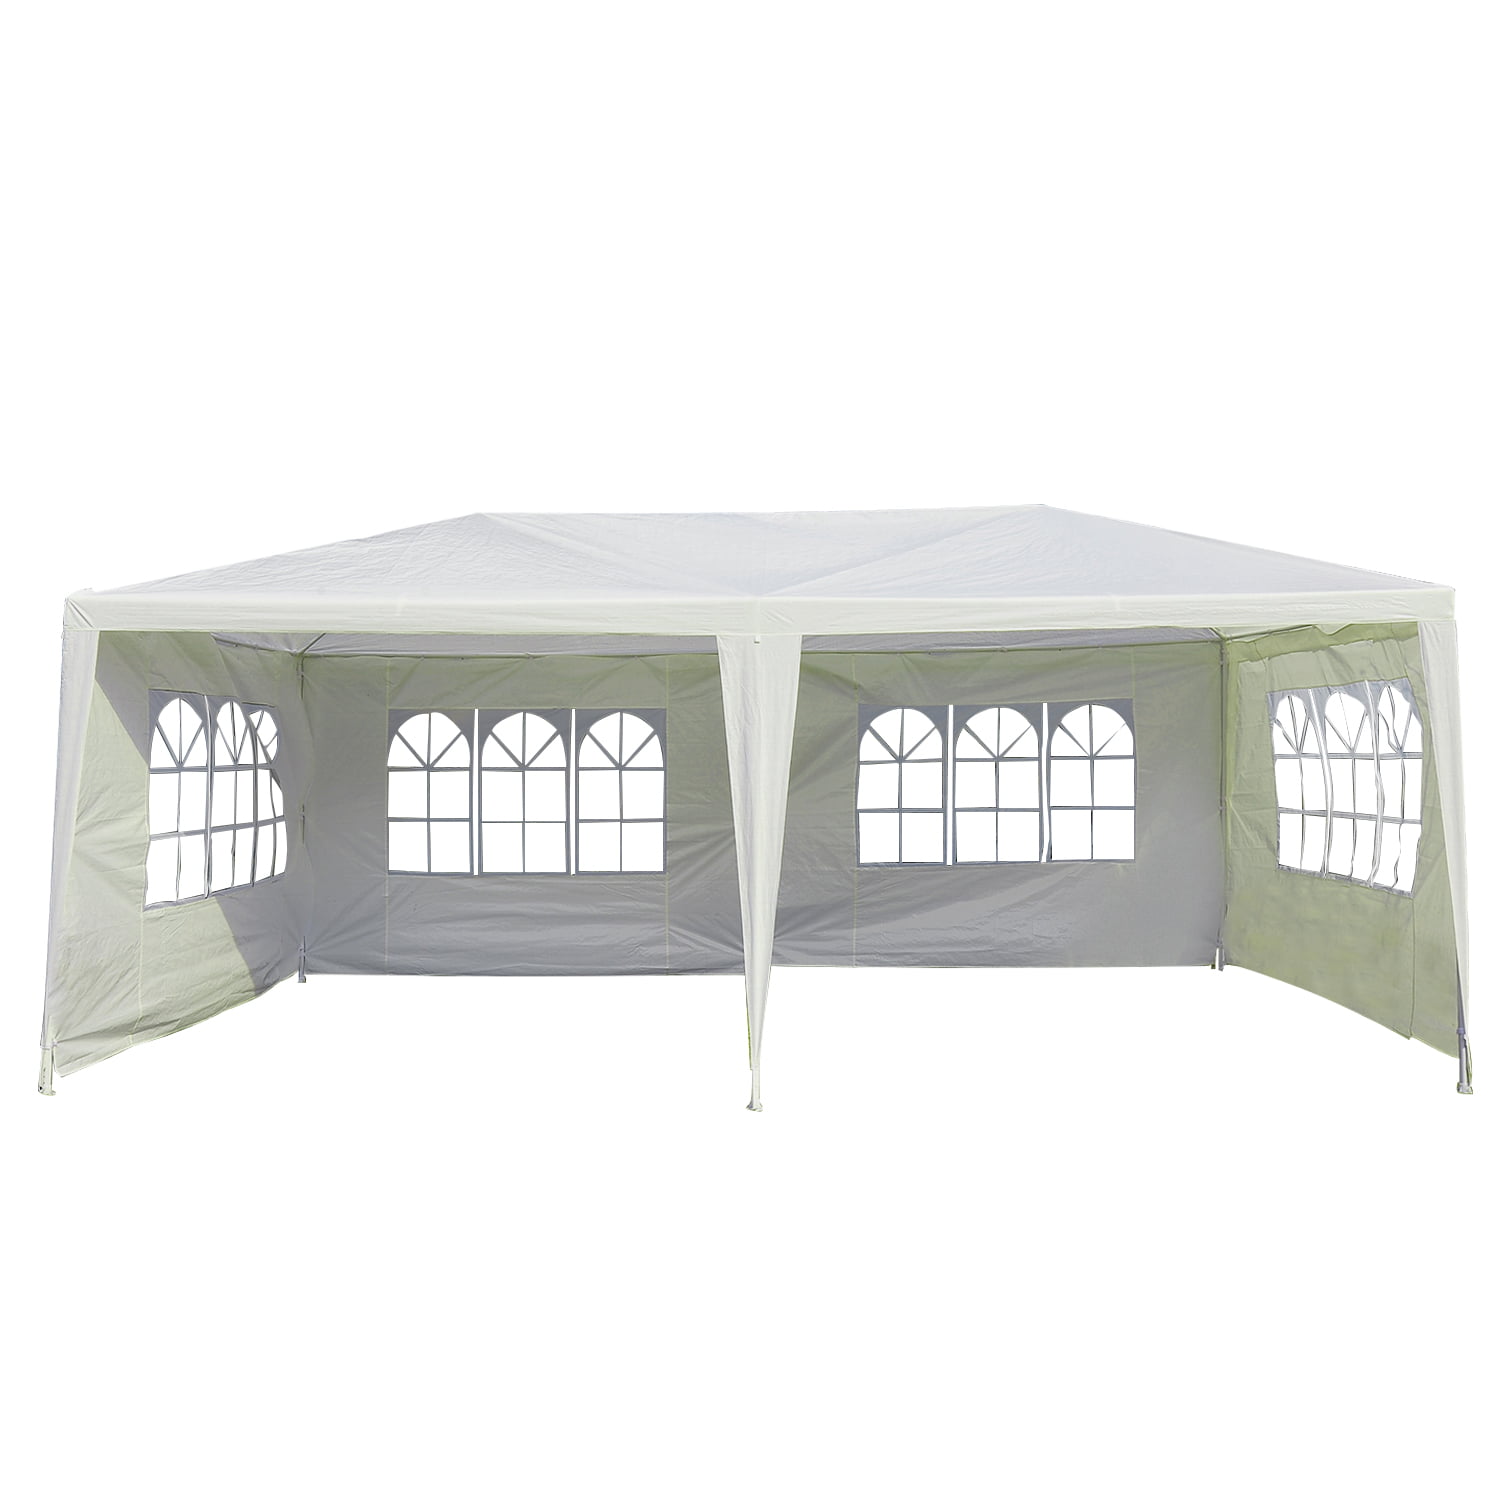 Outsunny Large 10' x 20' Gazebo Canopy Party Tent with 4 Removable ...
